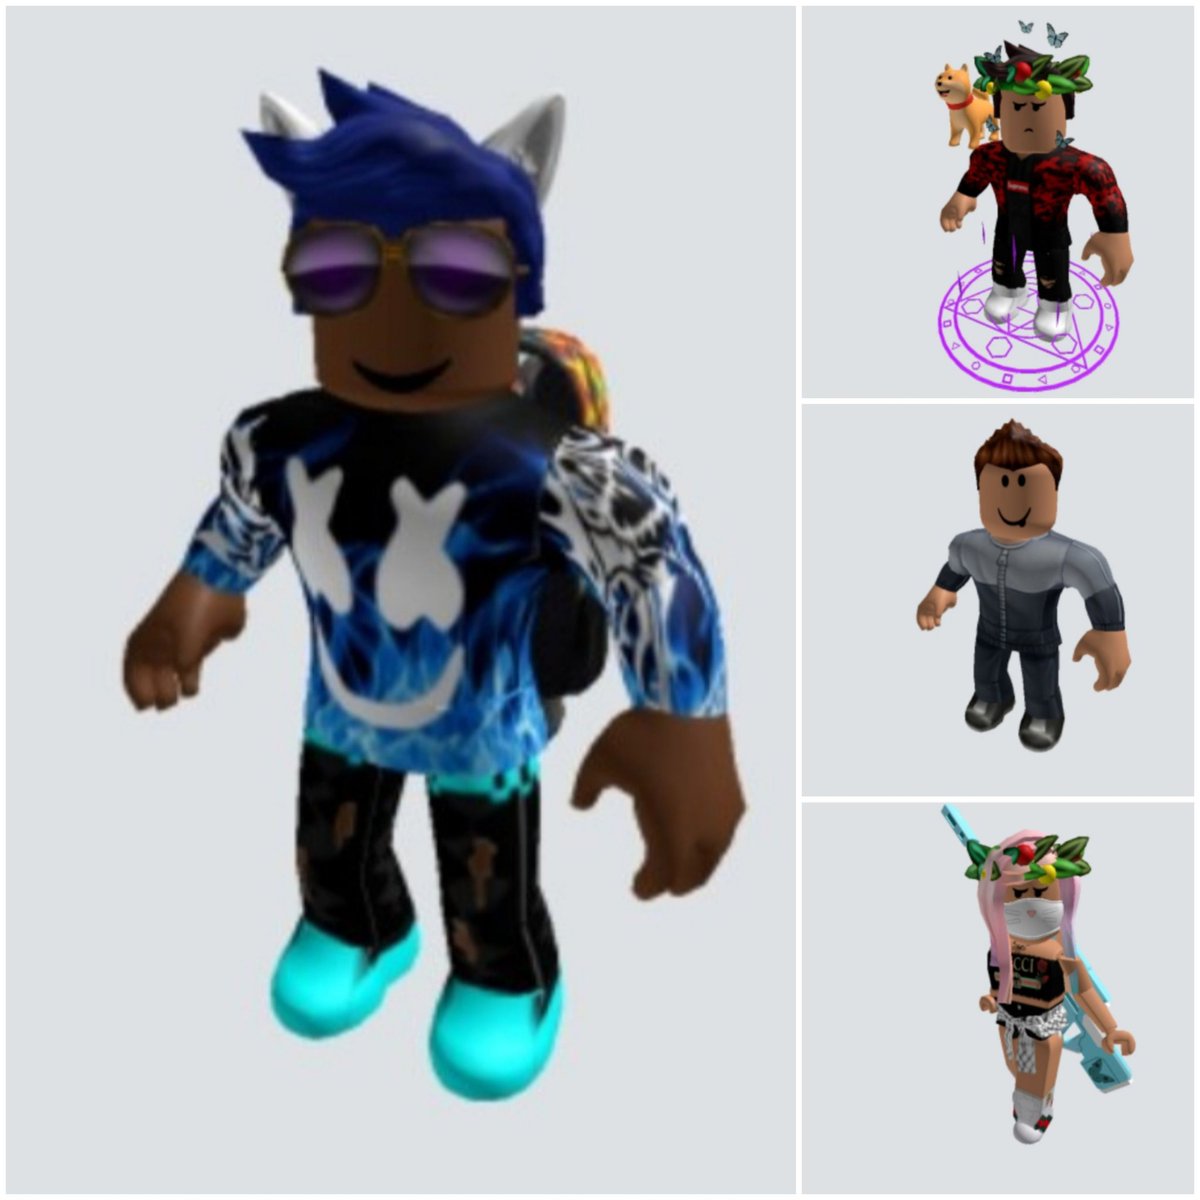 Roblox Skin Review on X: Today's special roblox players   / X